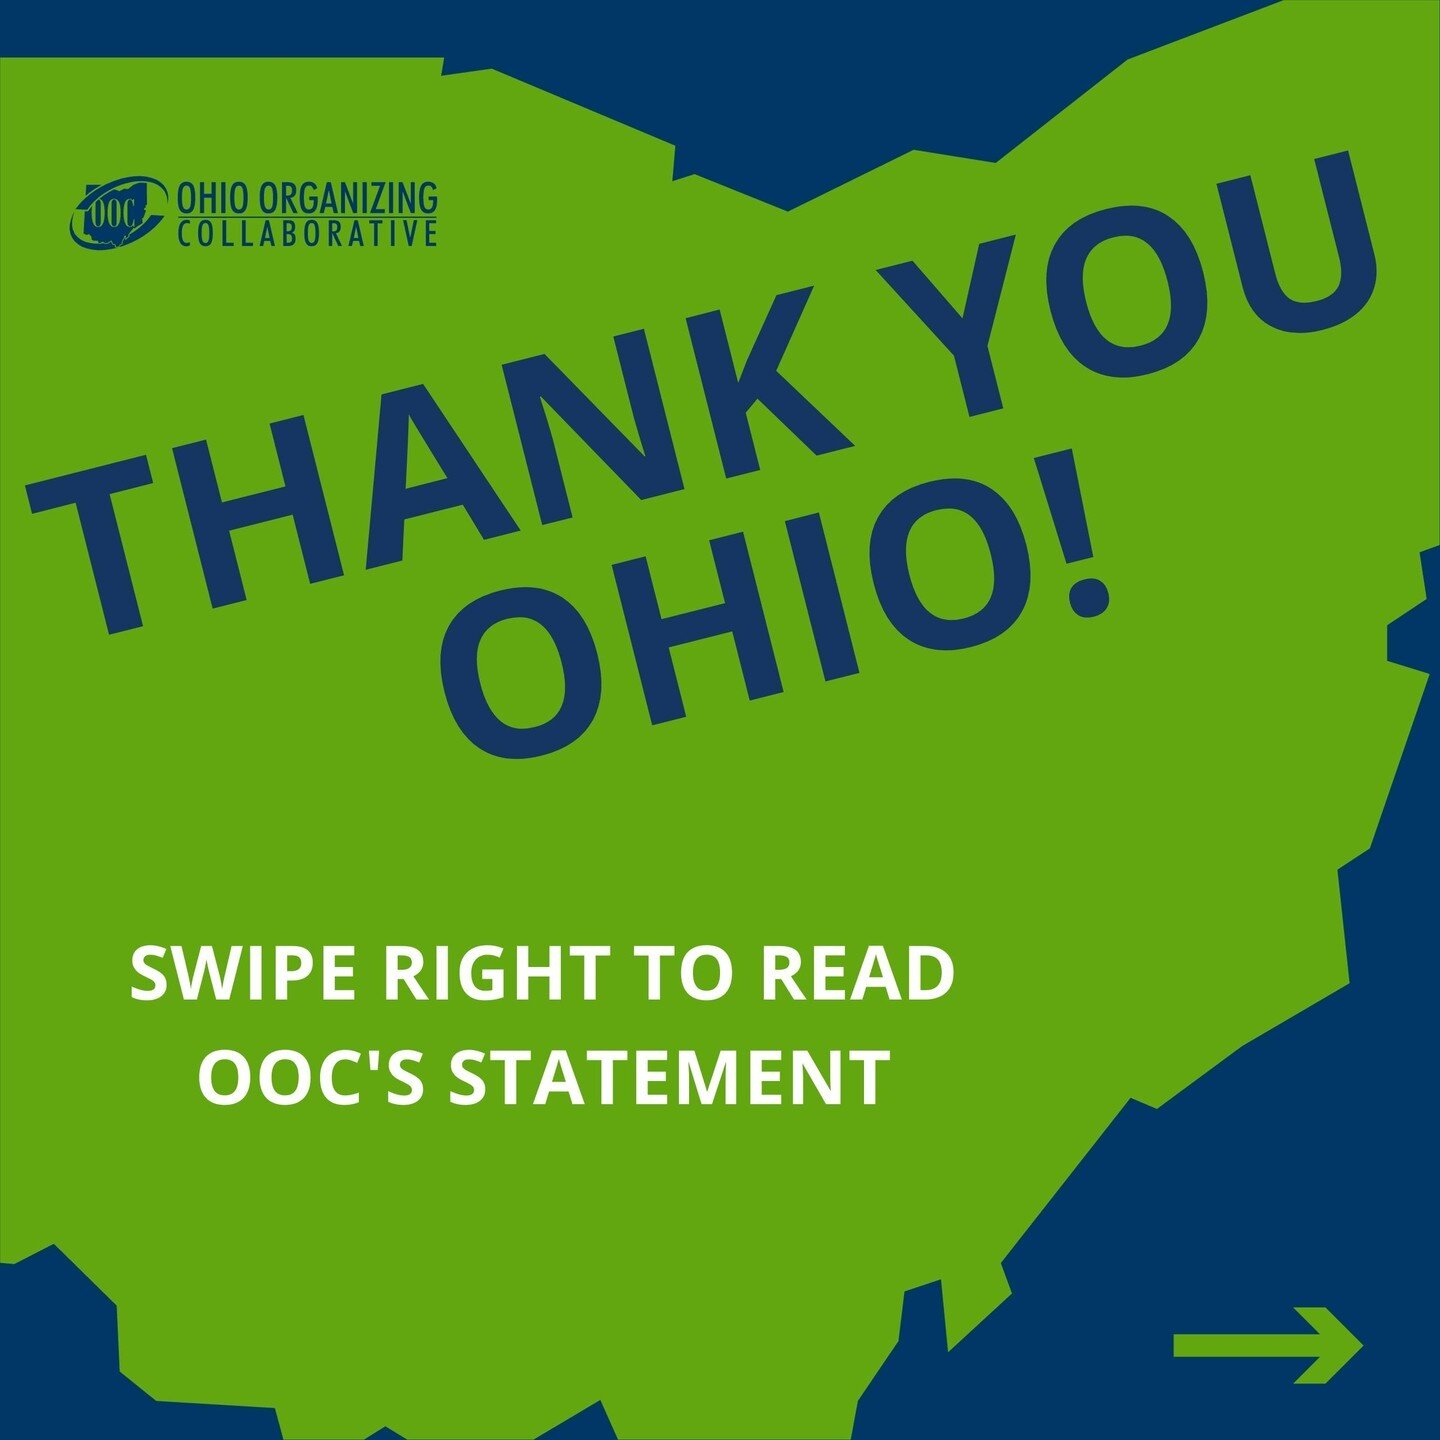 💚💙 OHIO! WE WON!!! 💚💙 

We&rsquo;re excited about the power of everyday Ohioans joining together and voting for Ohio&rsquo;s future. 

Winning Issues 1 and 2 is a powerful testament to the growing grassroots movement in Ohio that is paving the wa